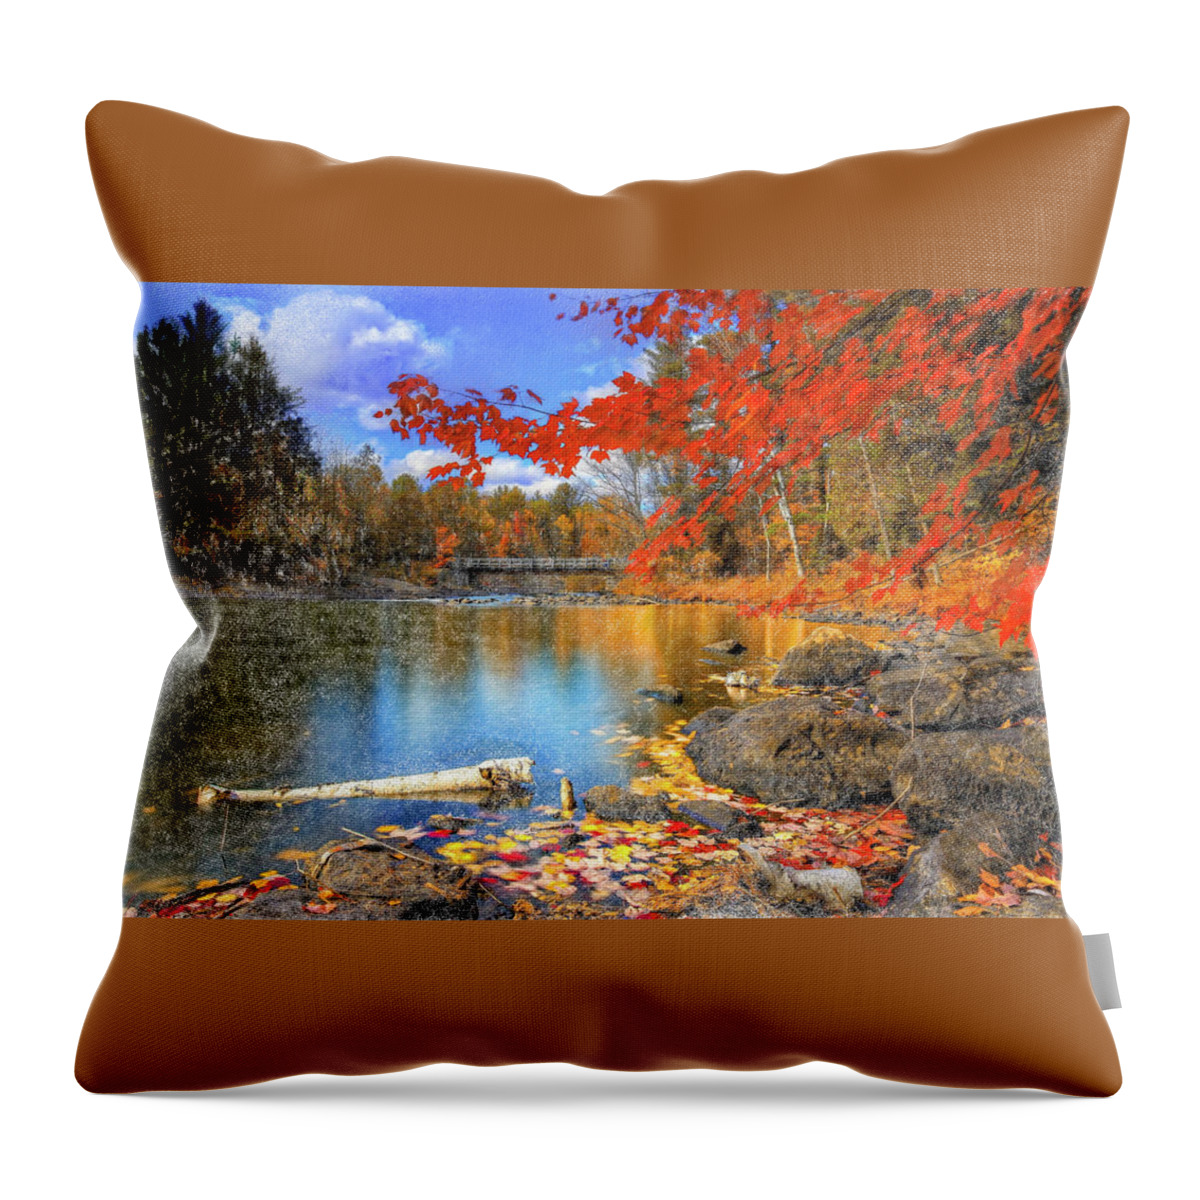 River Throw Pillow featuring the digital art Reflections by Renee Skiba